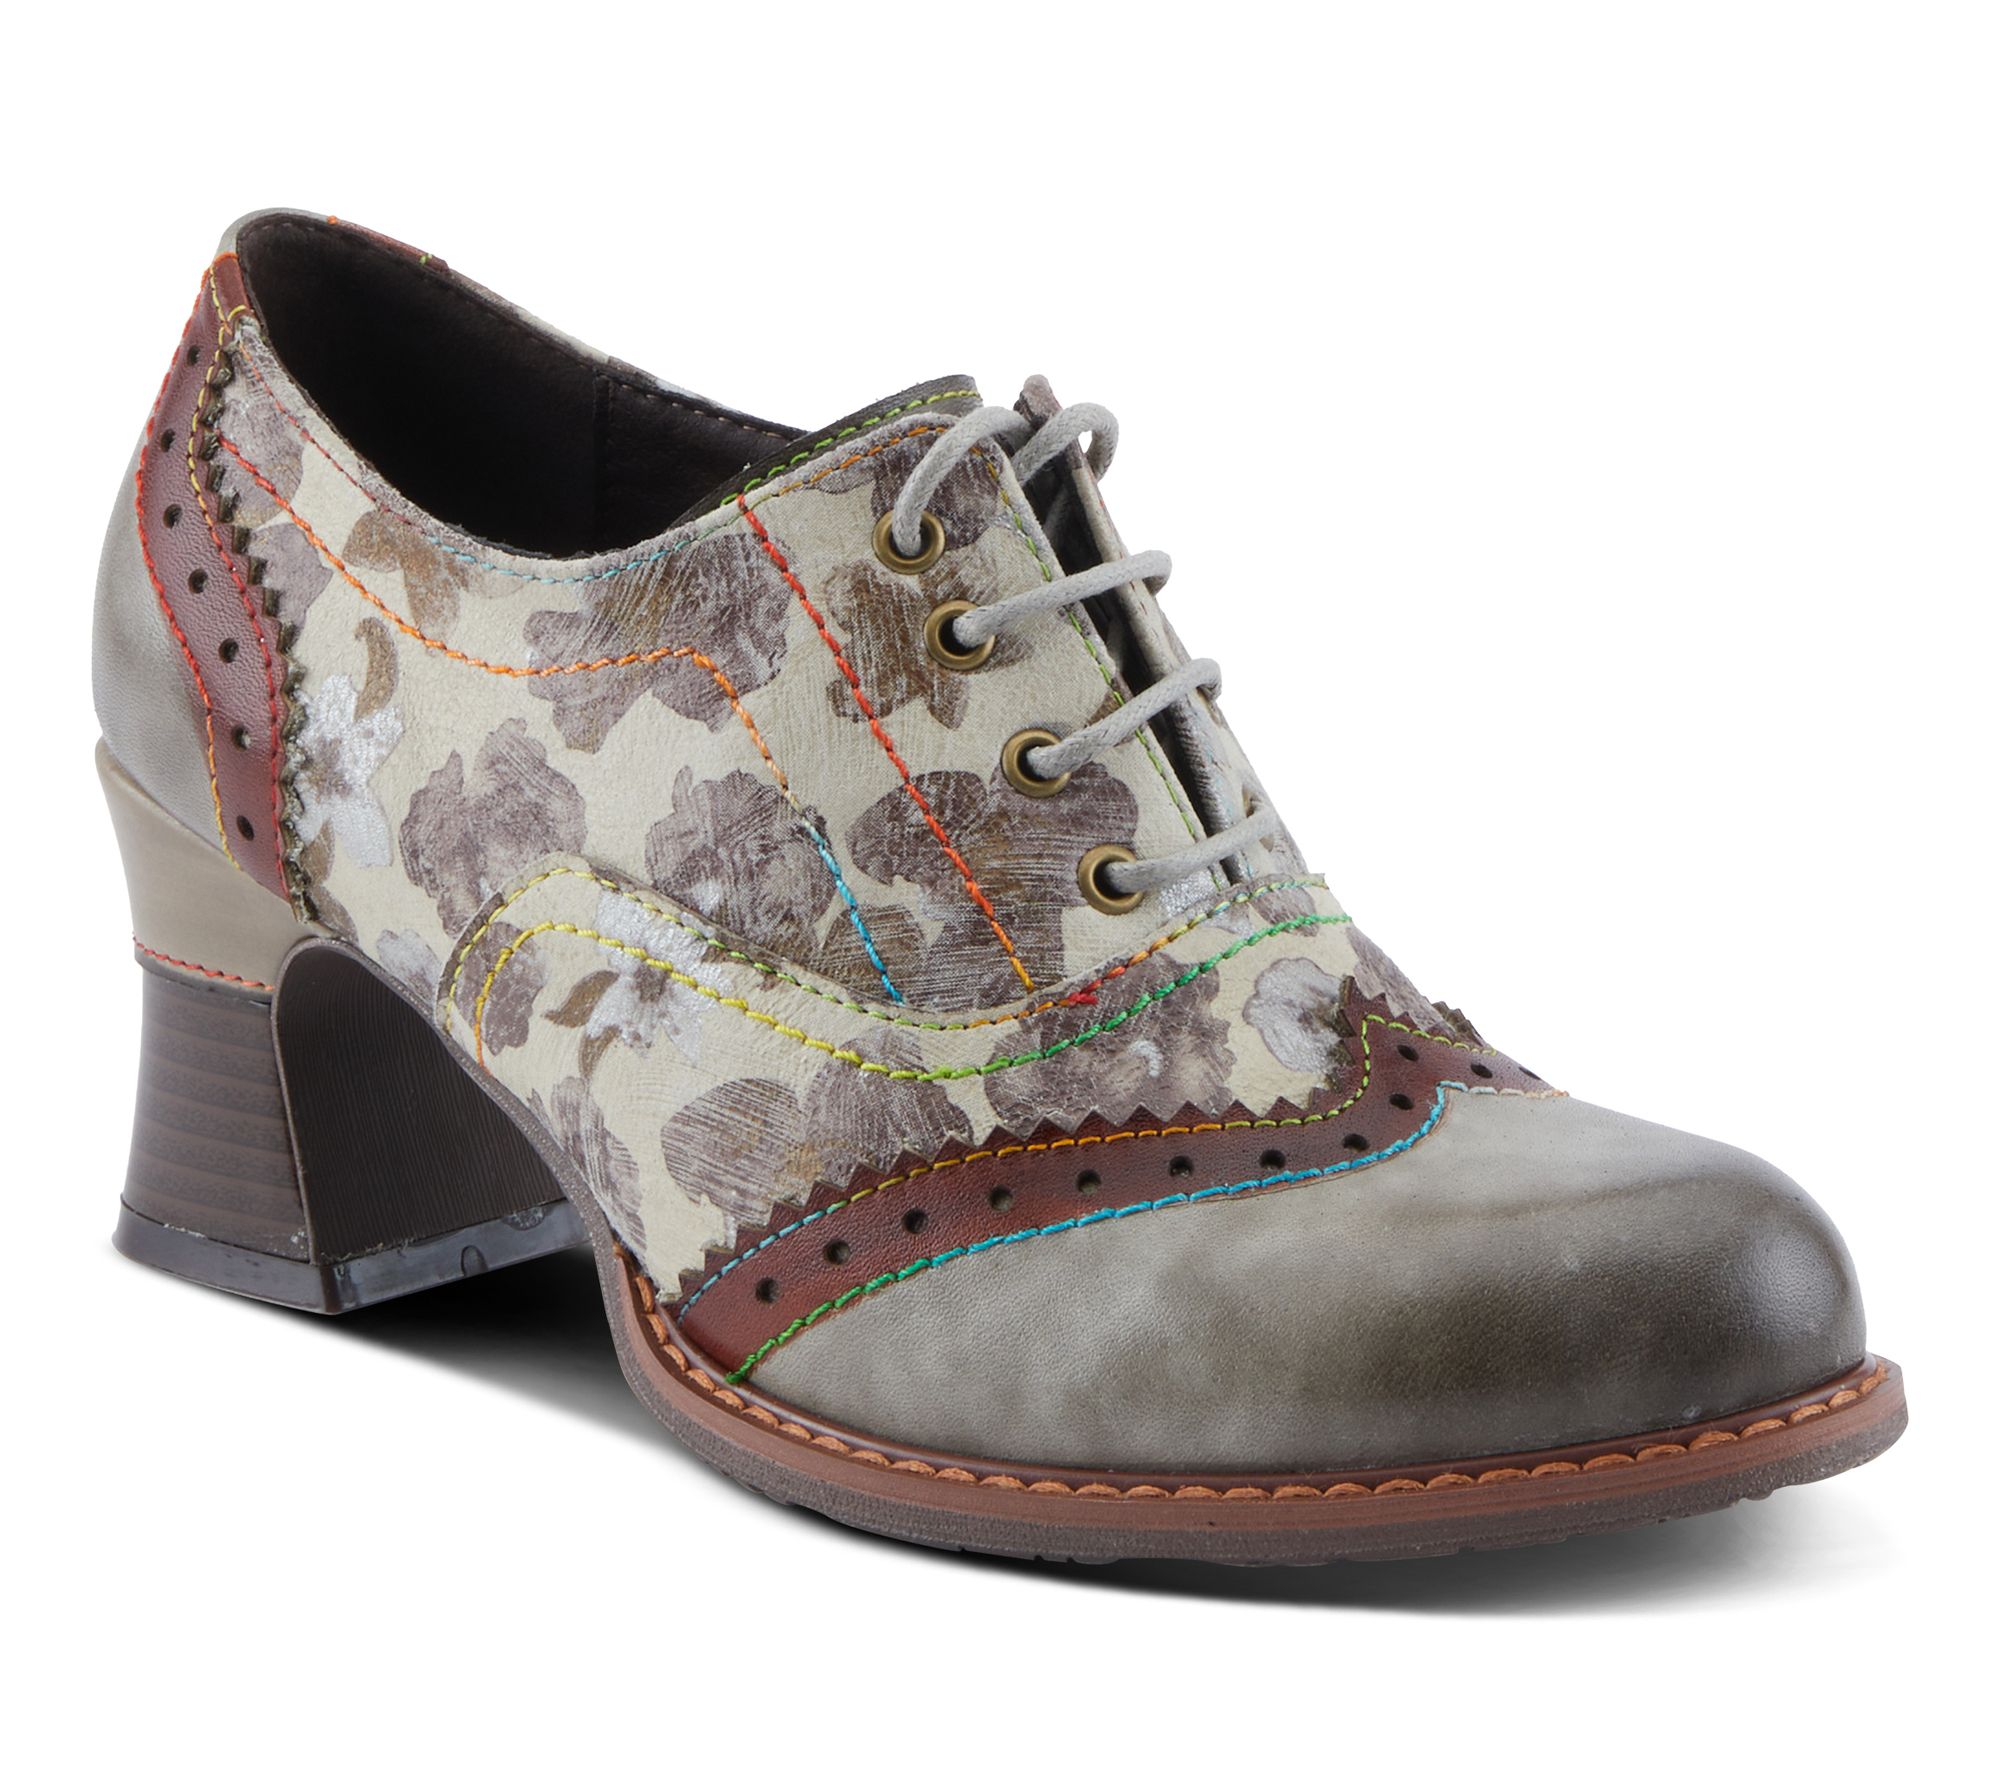 L'Artiste by Spring Step Leather Oxfords - Perrine